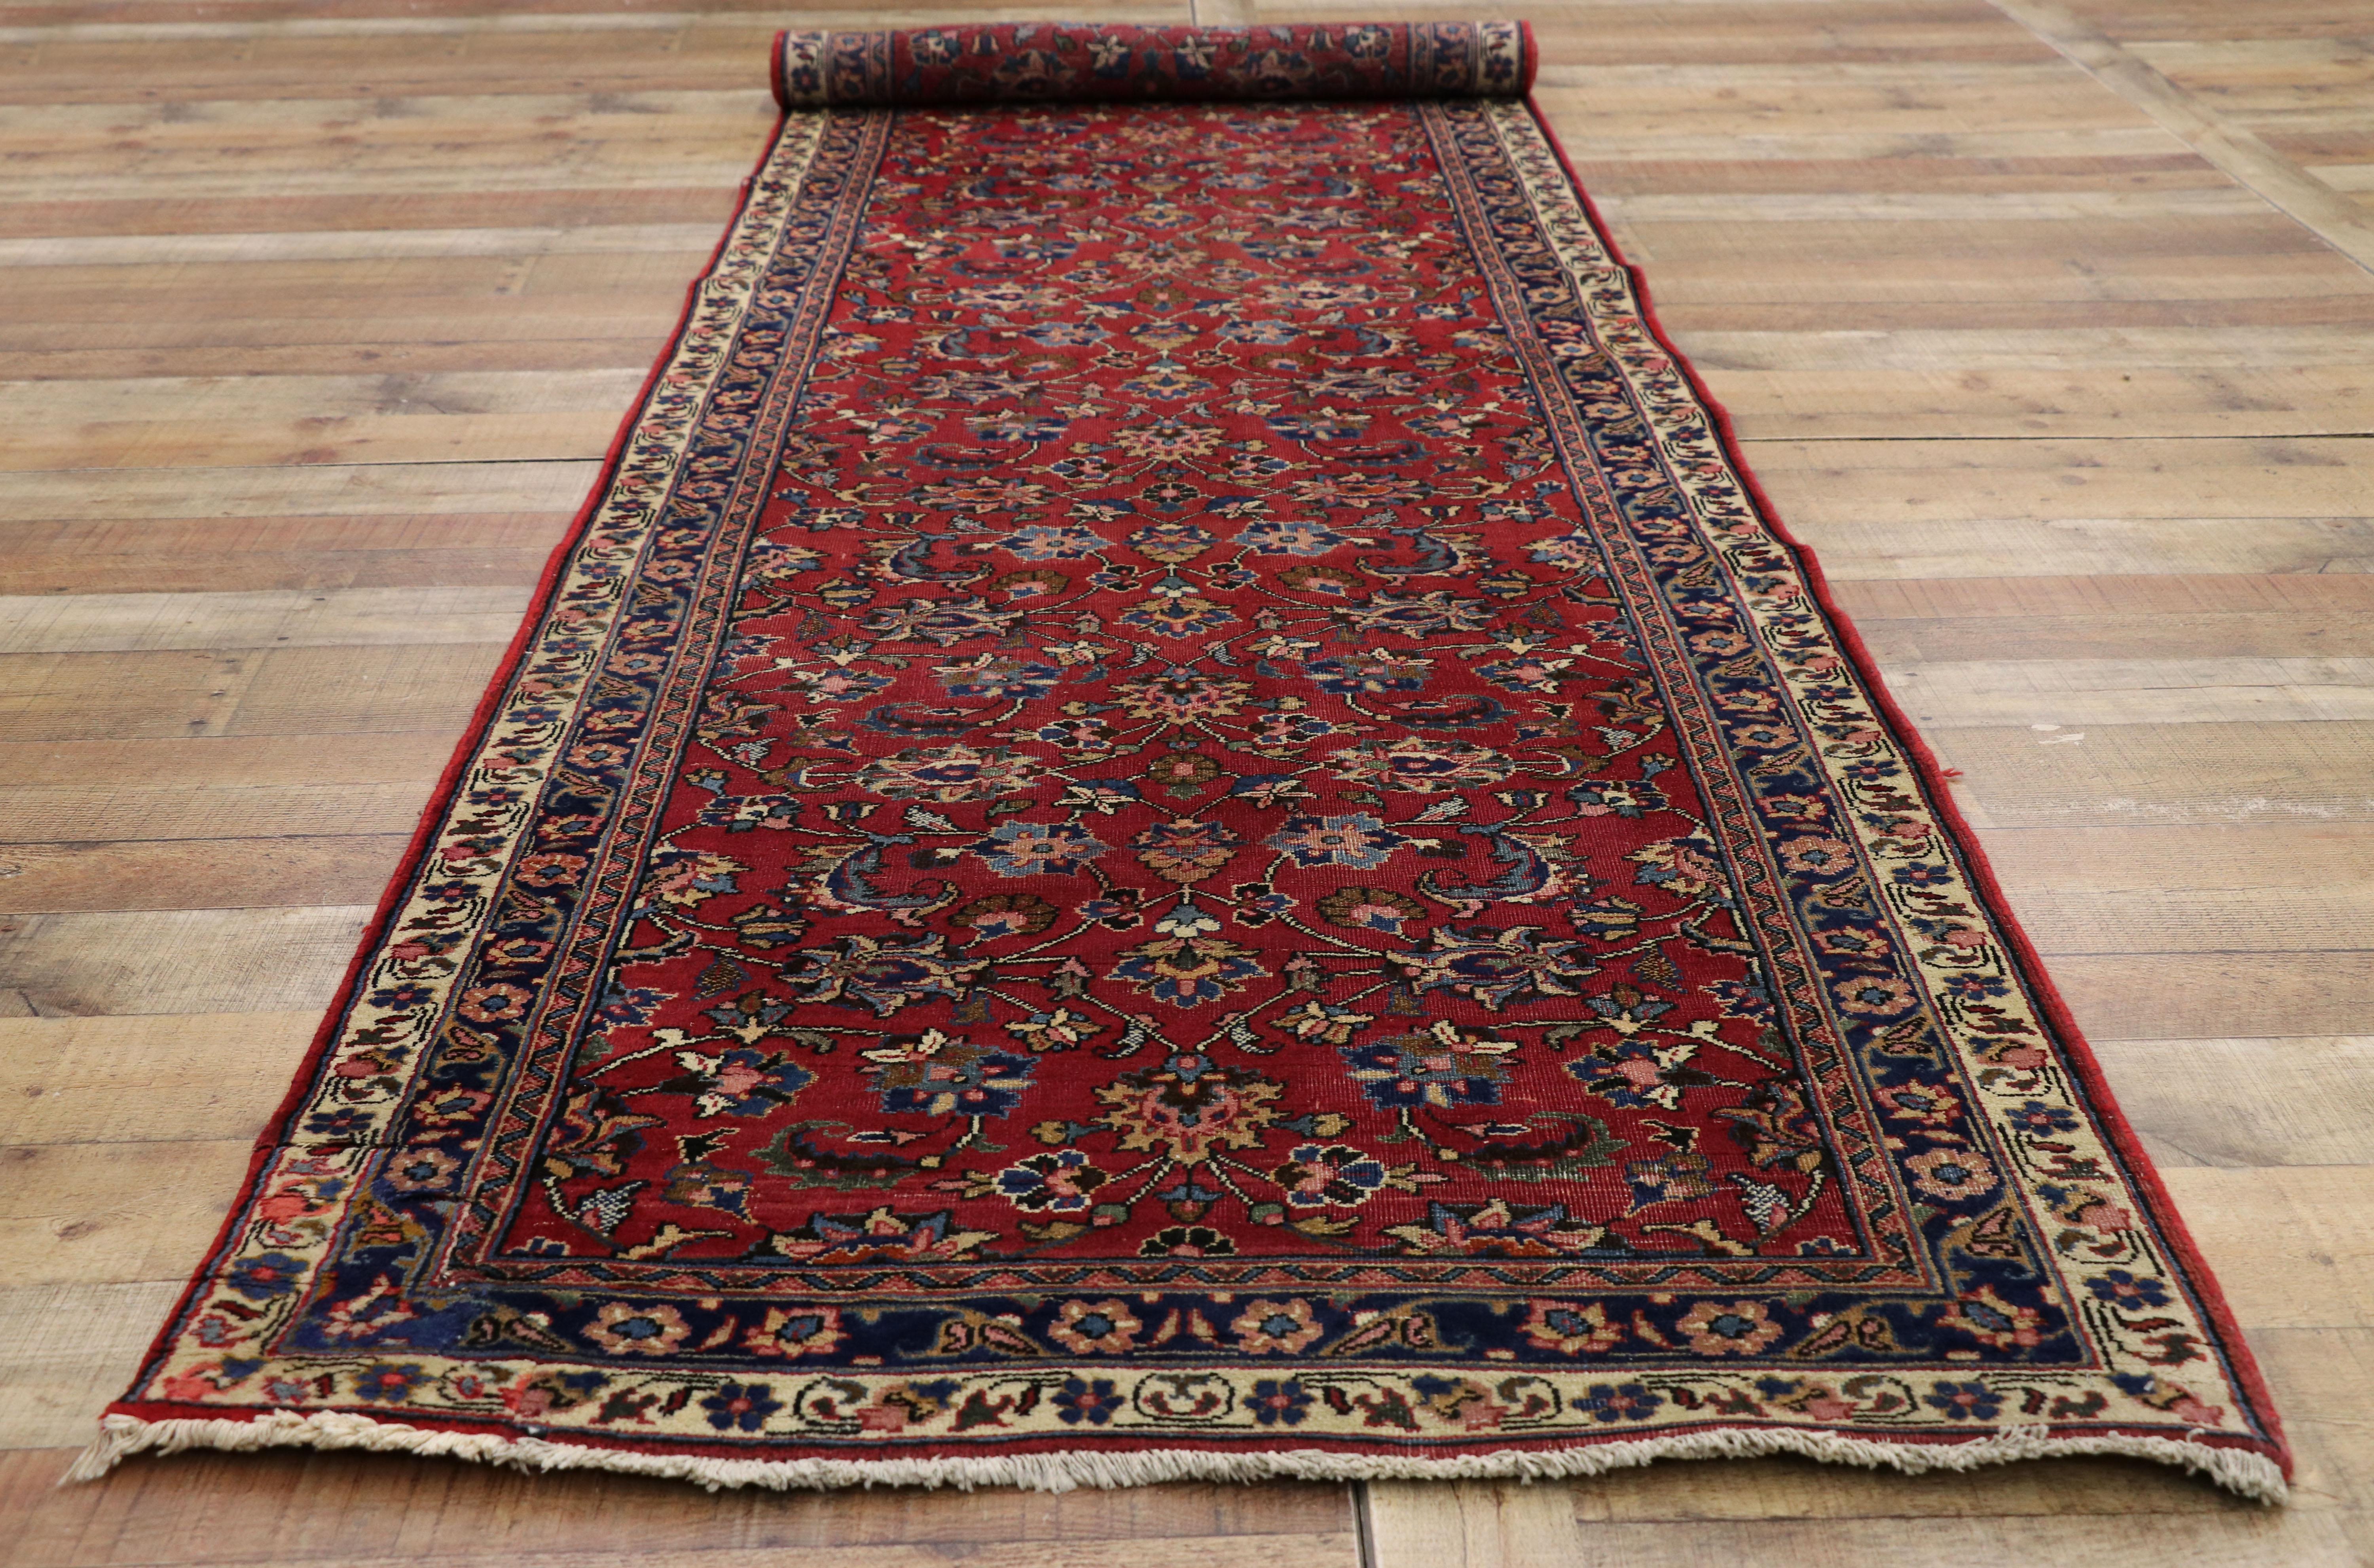 Wool Vintage Persian Mashhad Runner with Old World Parisian Style For Sale